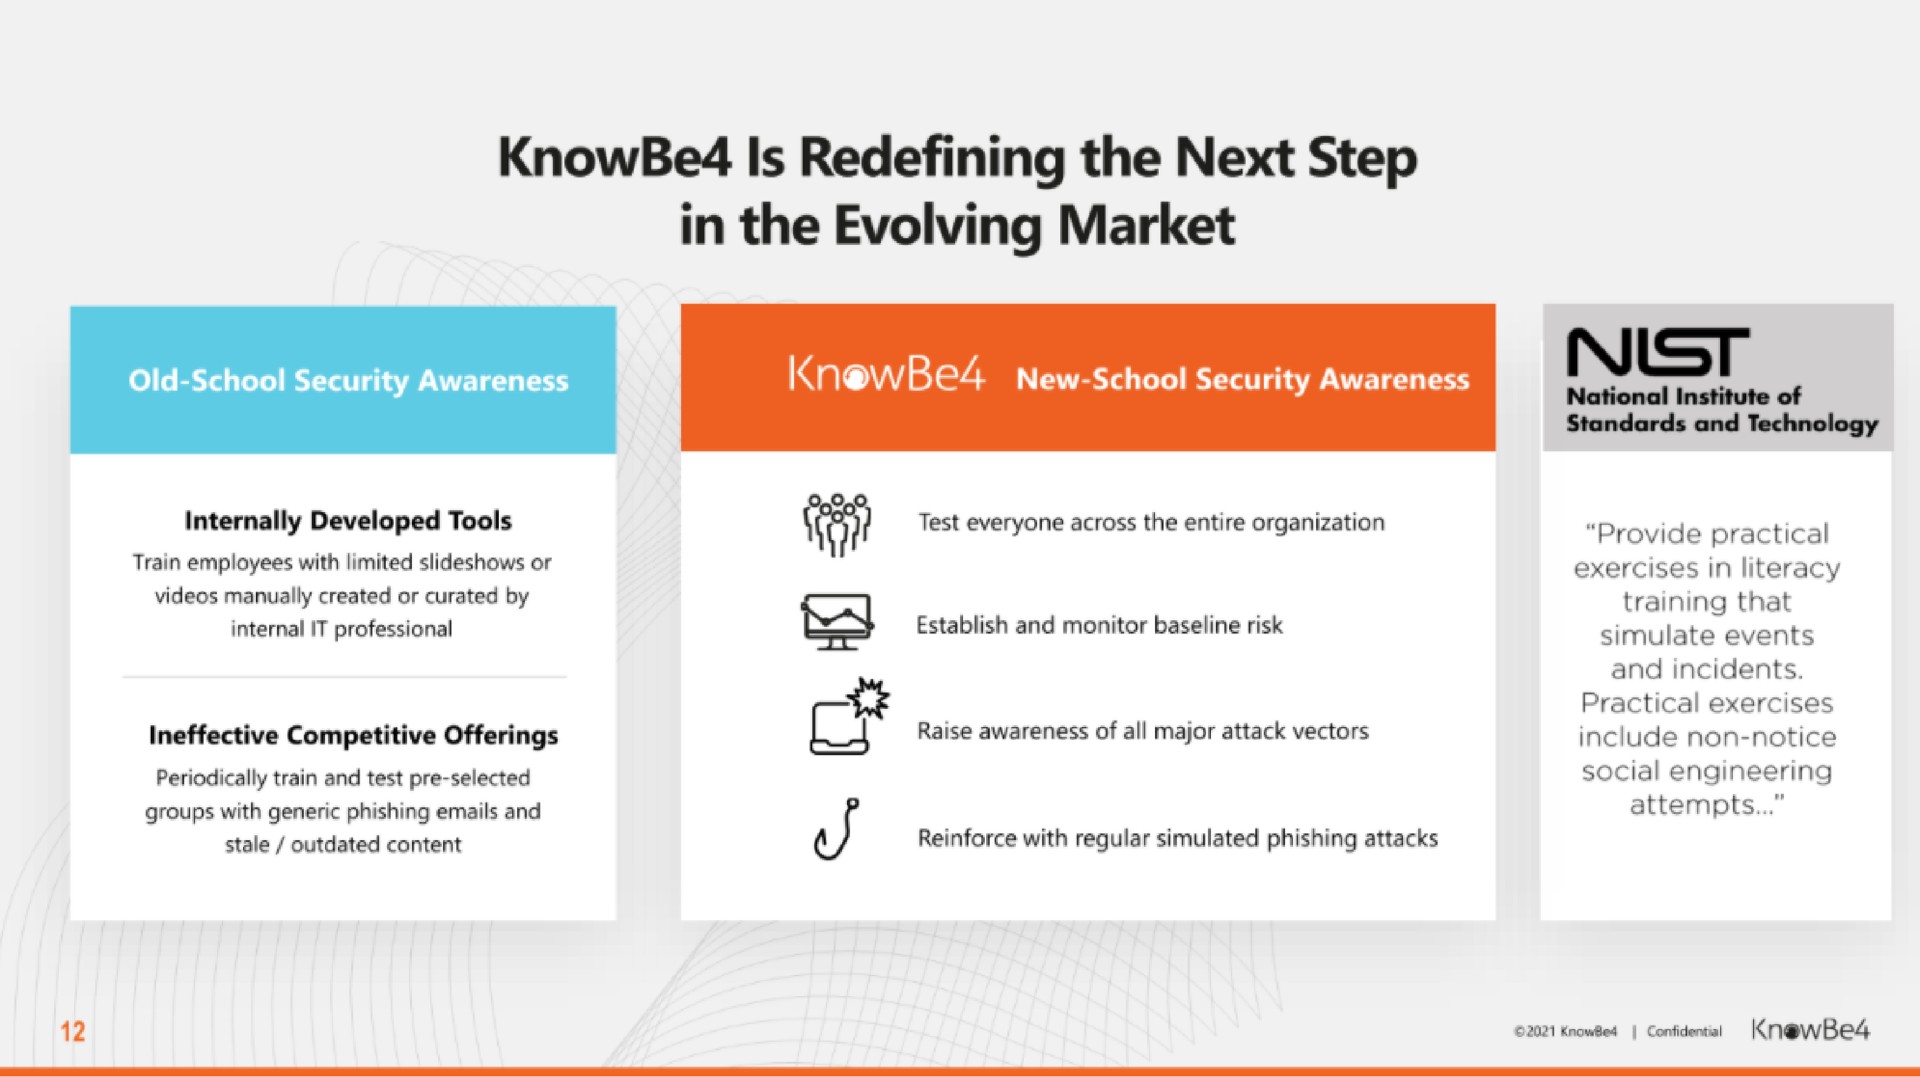 is redefining the next step in the evolving market | KnowBe4